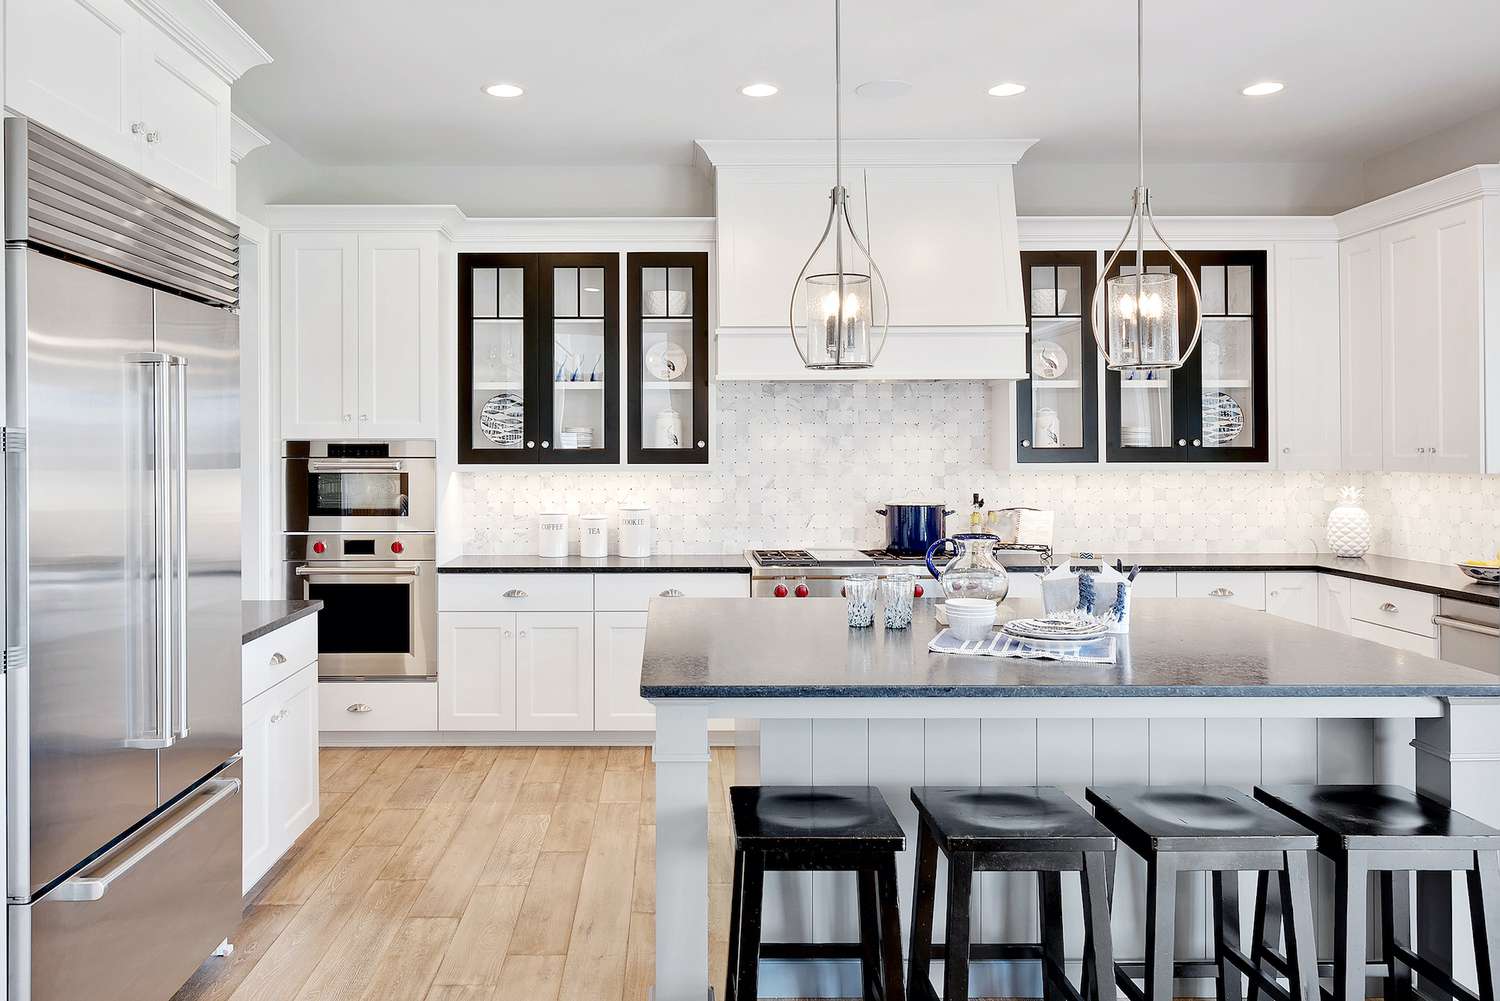 Luxe Design Ideas for an Expensive Looking Kitchen on a Budget ...